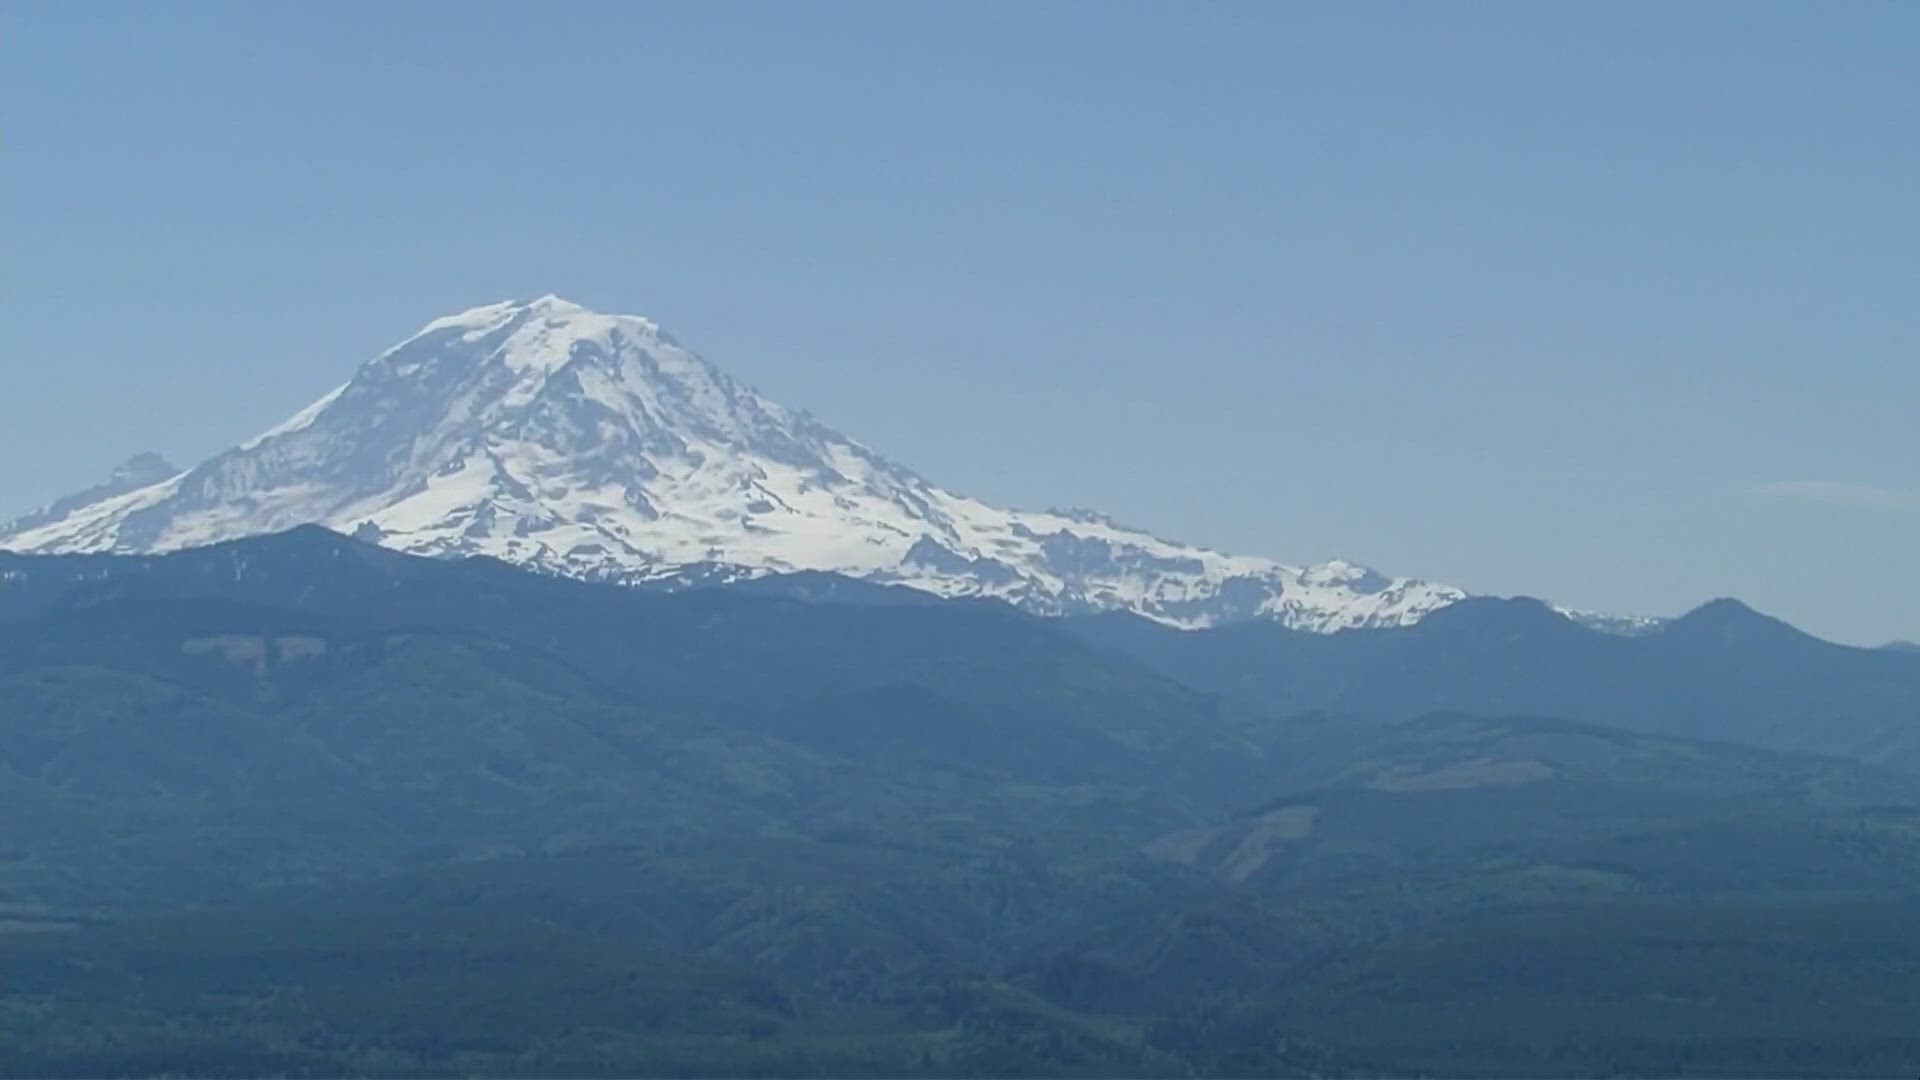 Search and rescue crews are looking for a man who went missing while climbing Mount Rainier last week.